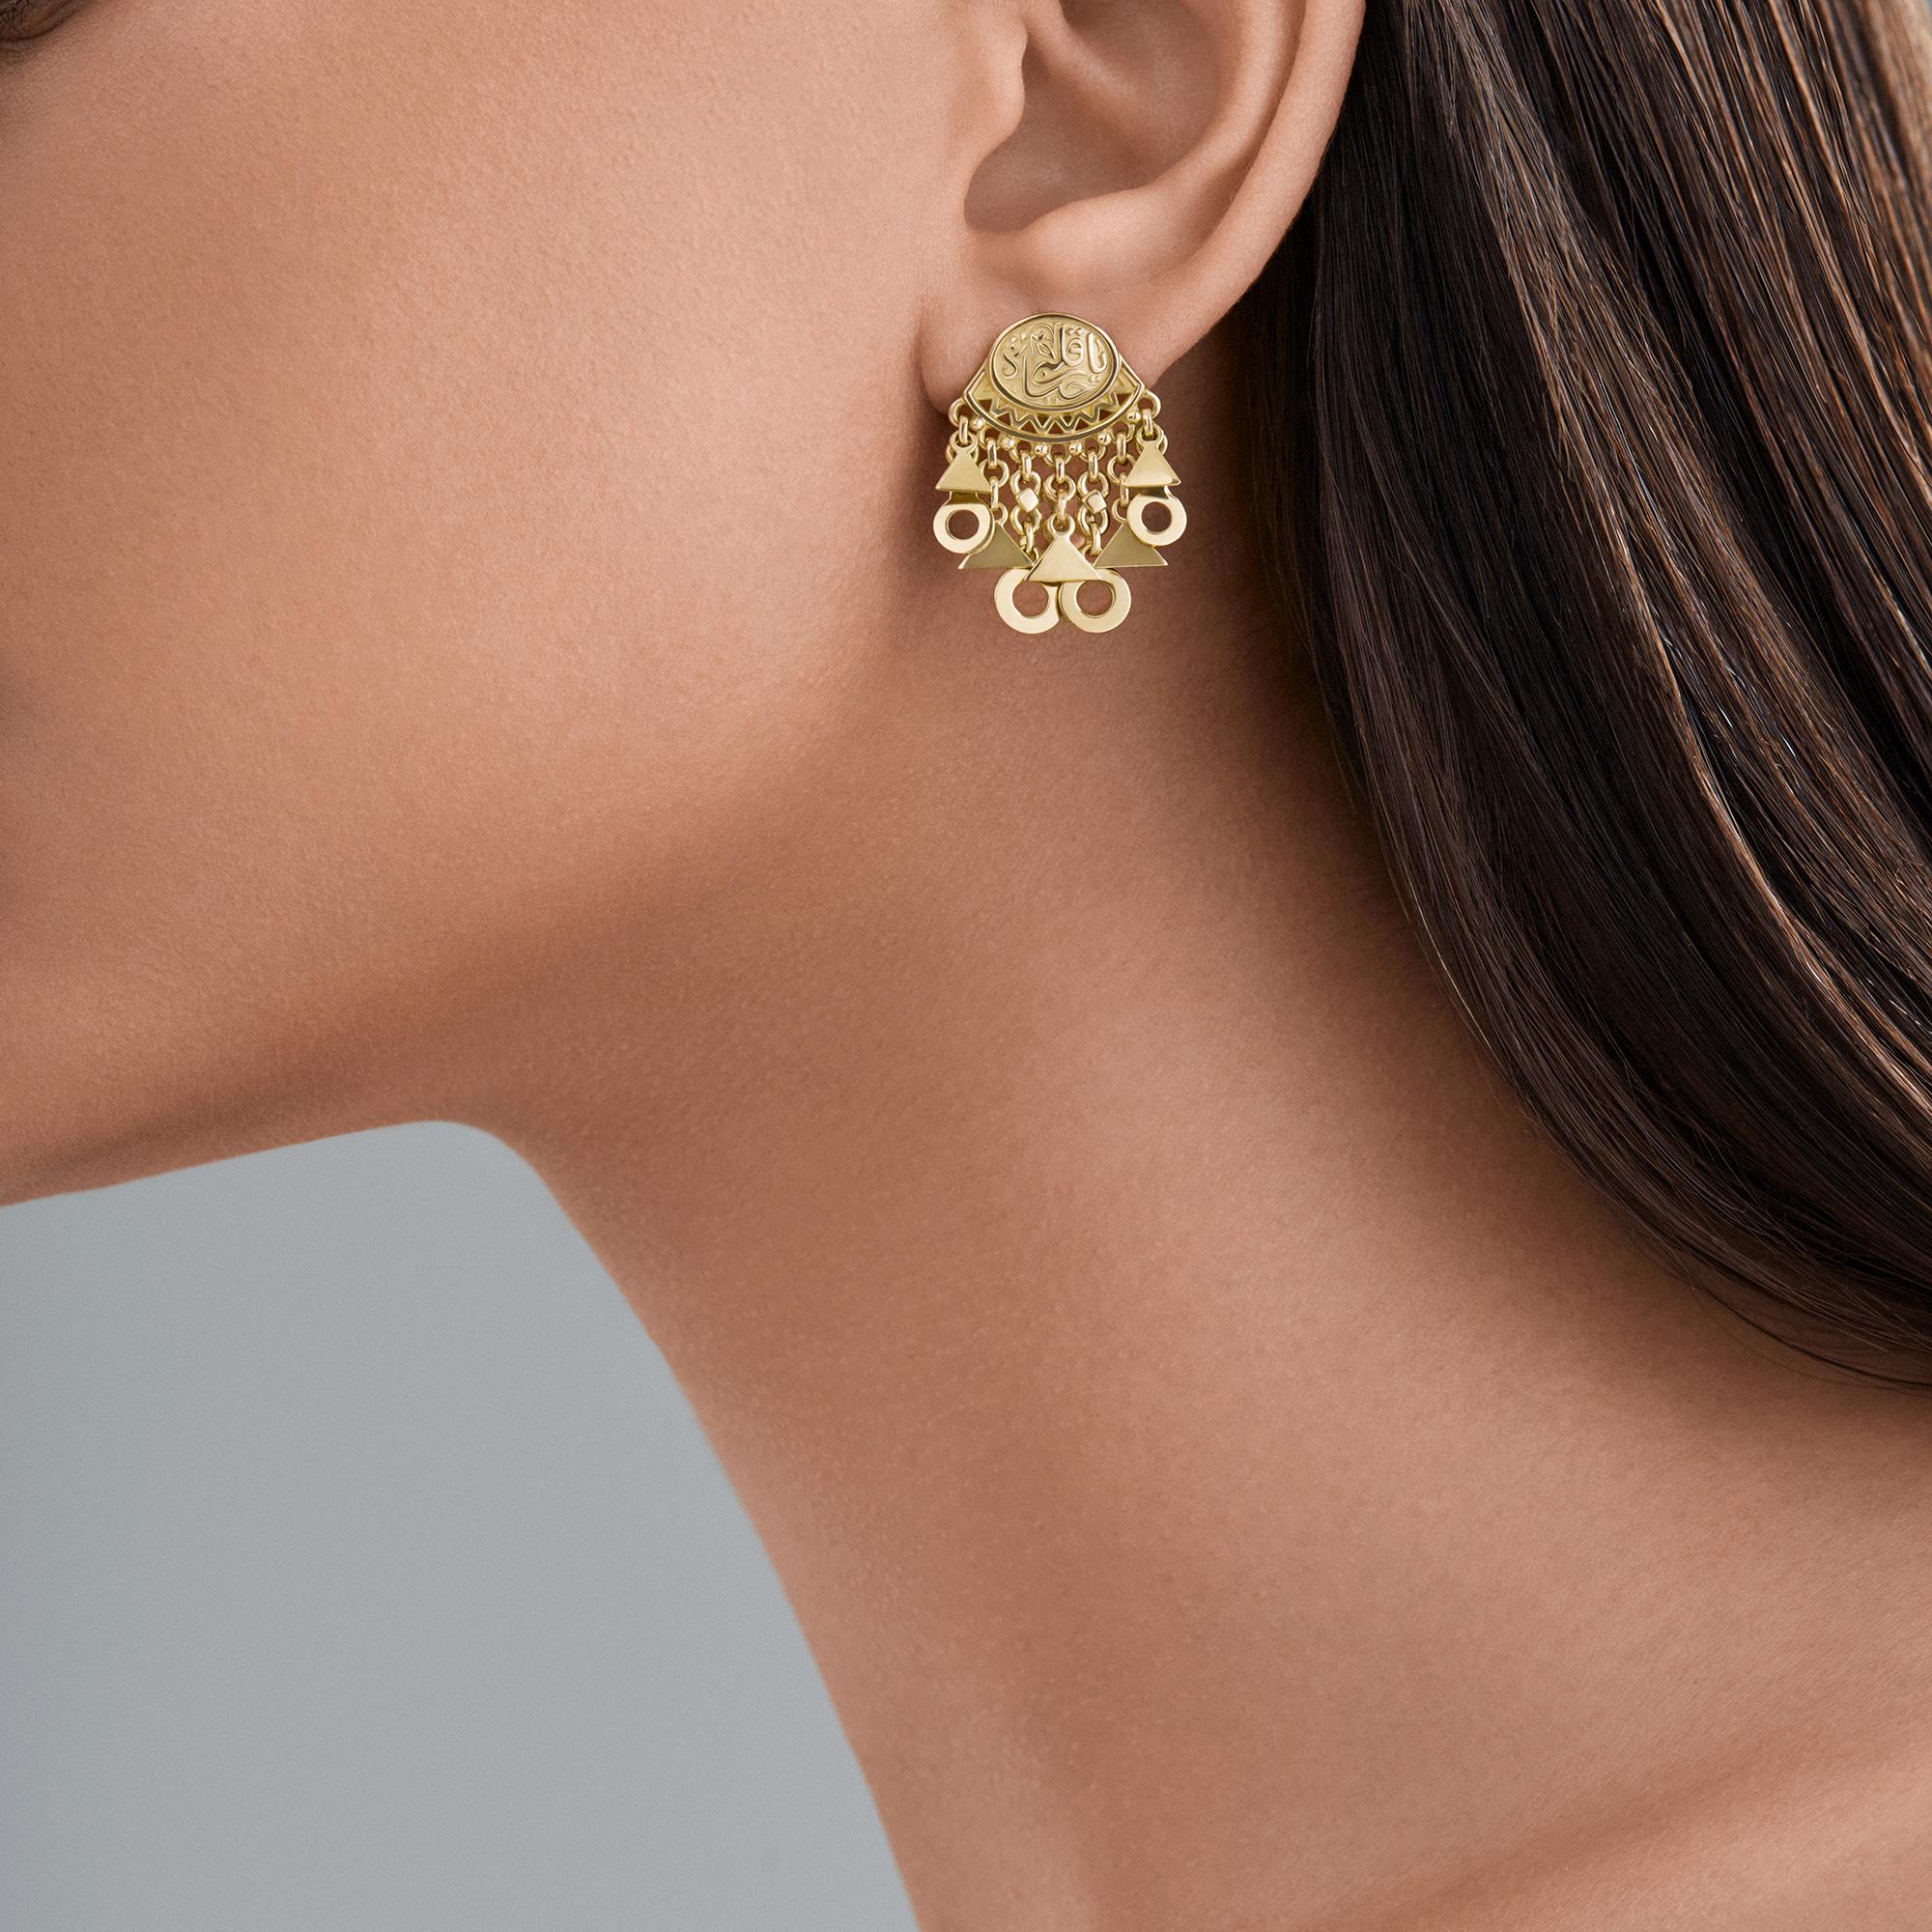 18 Karat Gold Earrings adorned with calligraphy and charms inspired by styles traditionally worn by women of the Egyptian countryside. Part of Azza Fahmy's Gypsy collection which takes inspiration from the nomadic Amazigh tribes people of Northern